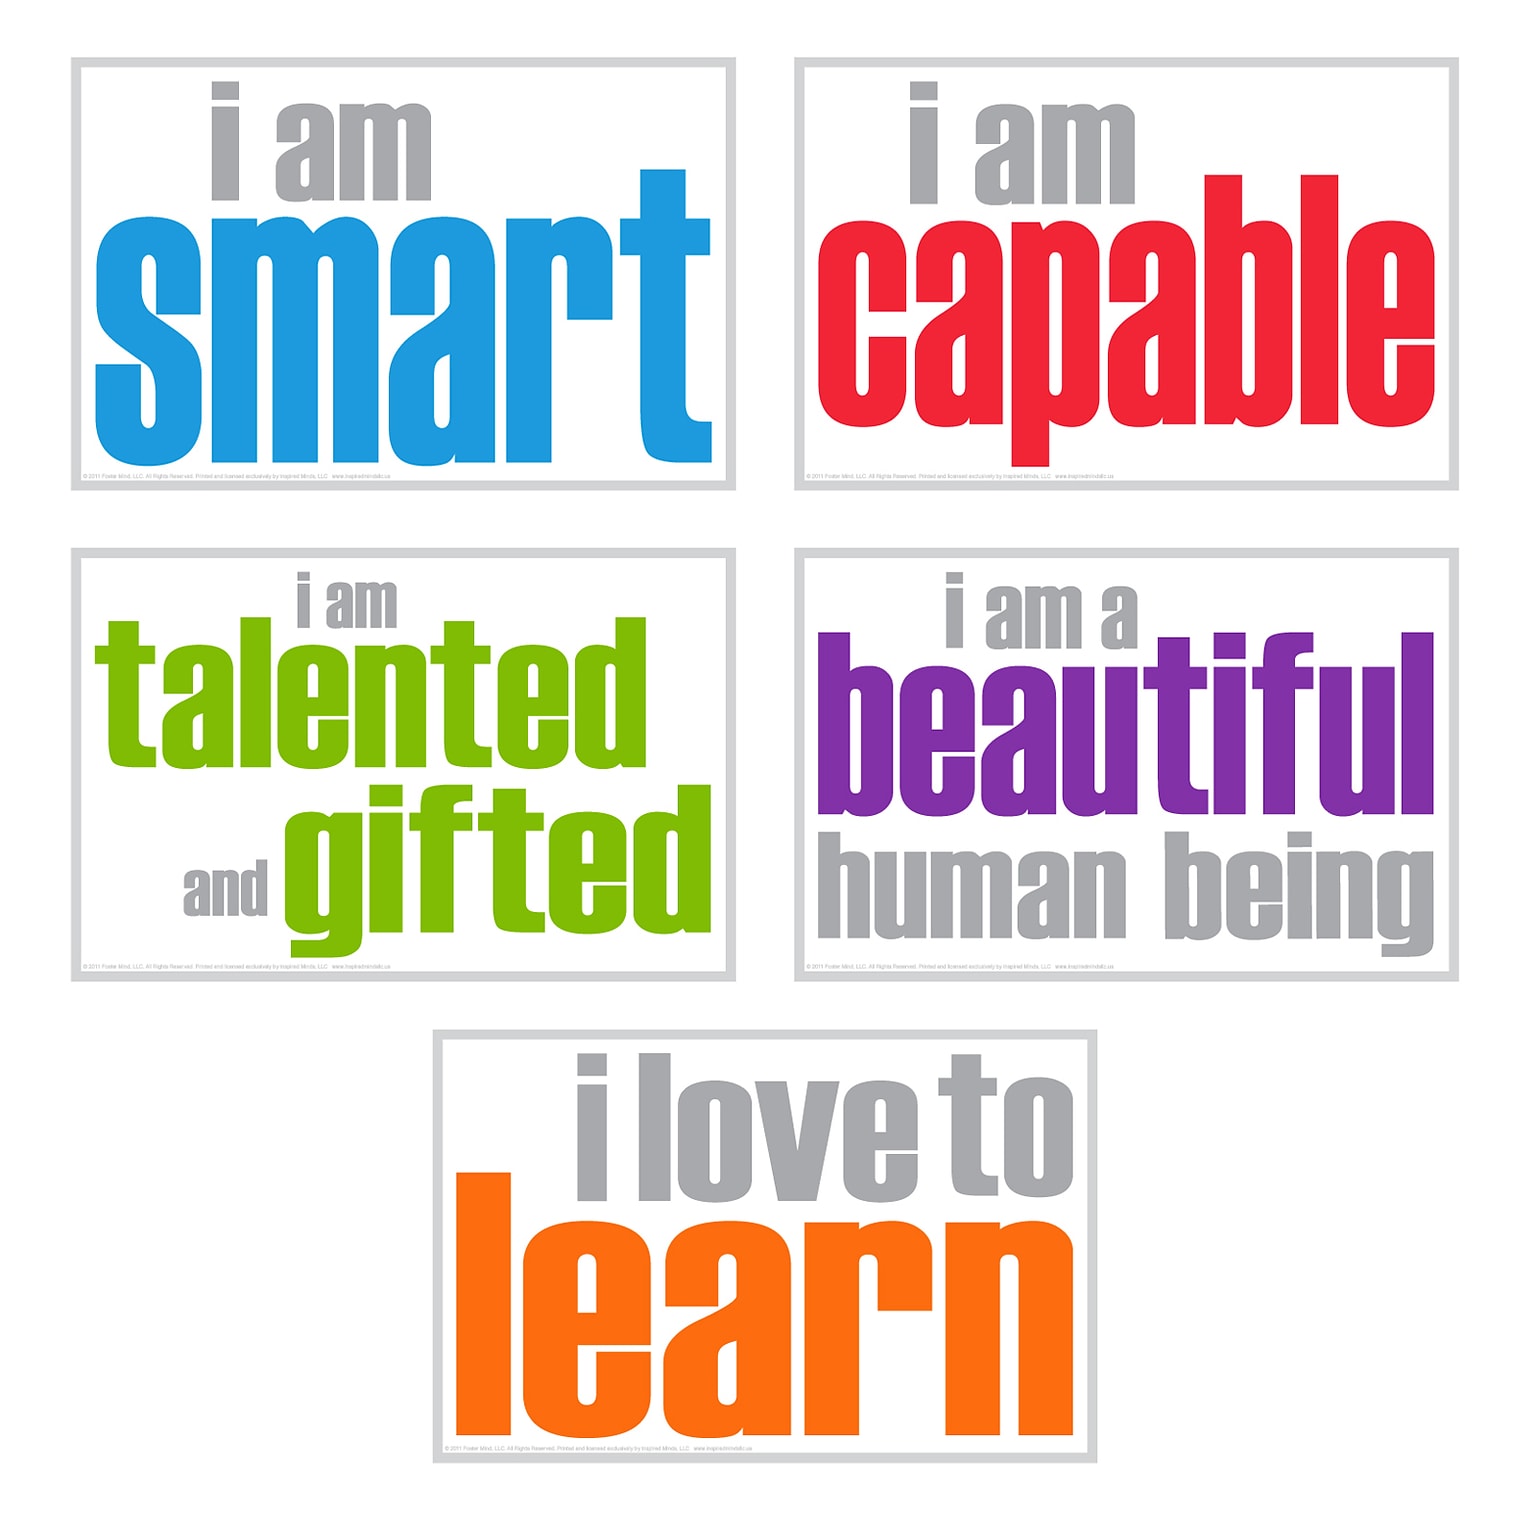 INSPIRED MINDS 11 x 17Self-Esteem Posters, Pack of 5 (ISM52351)